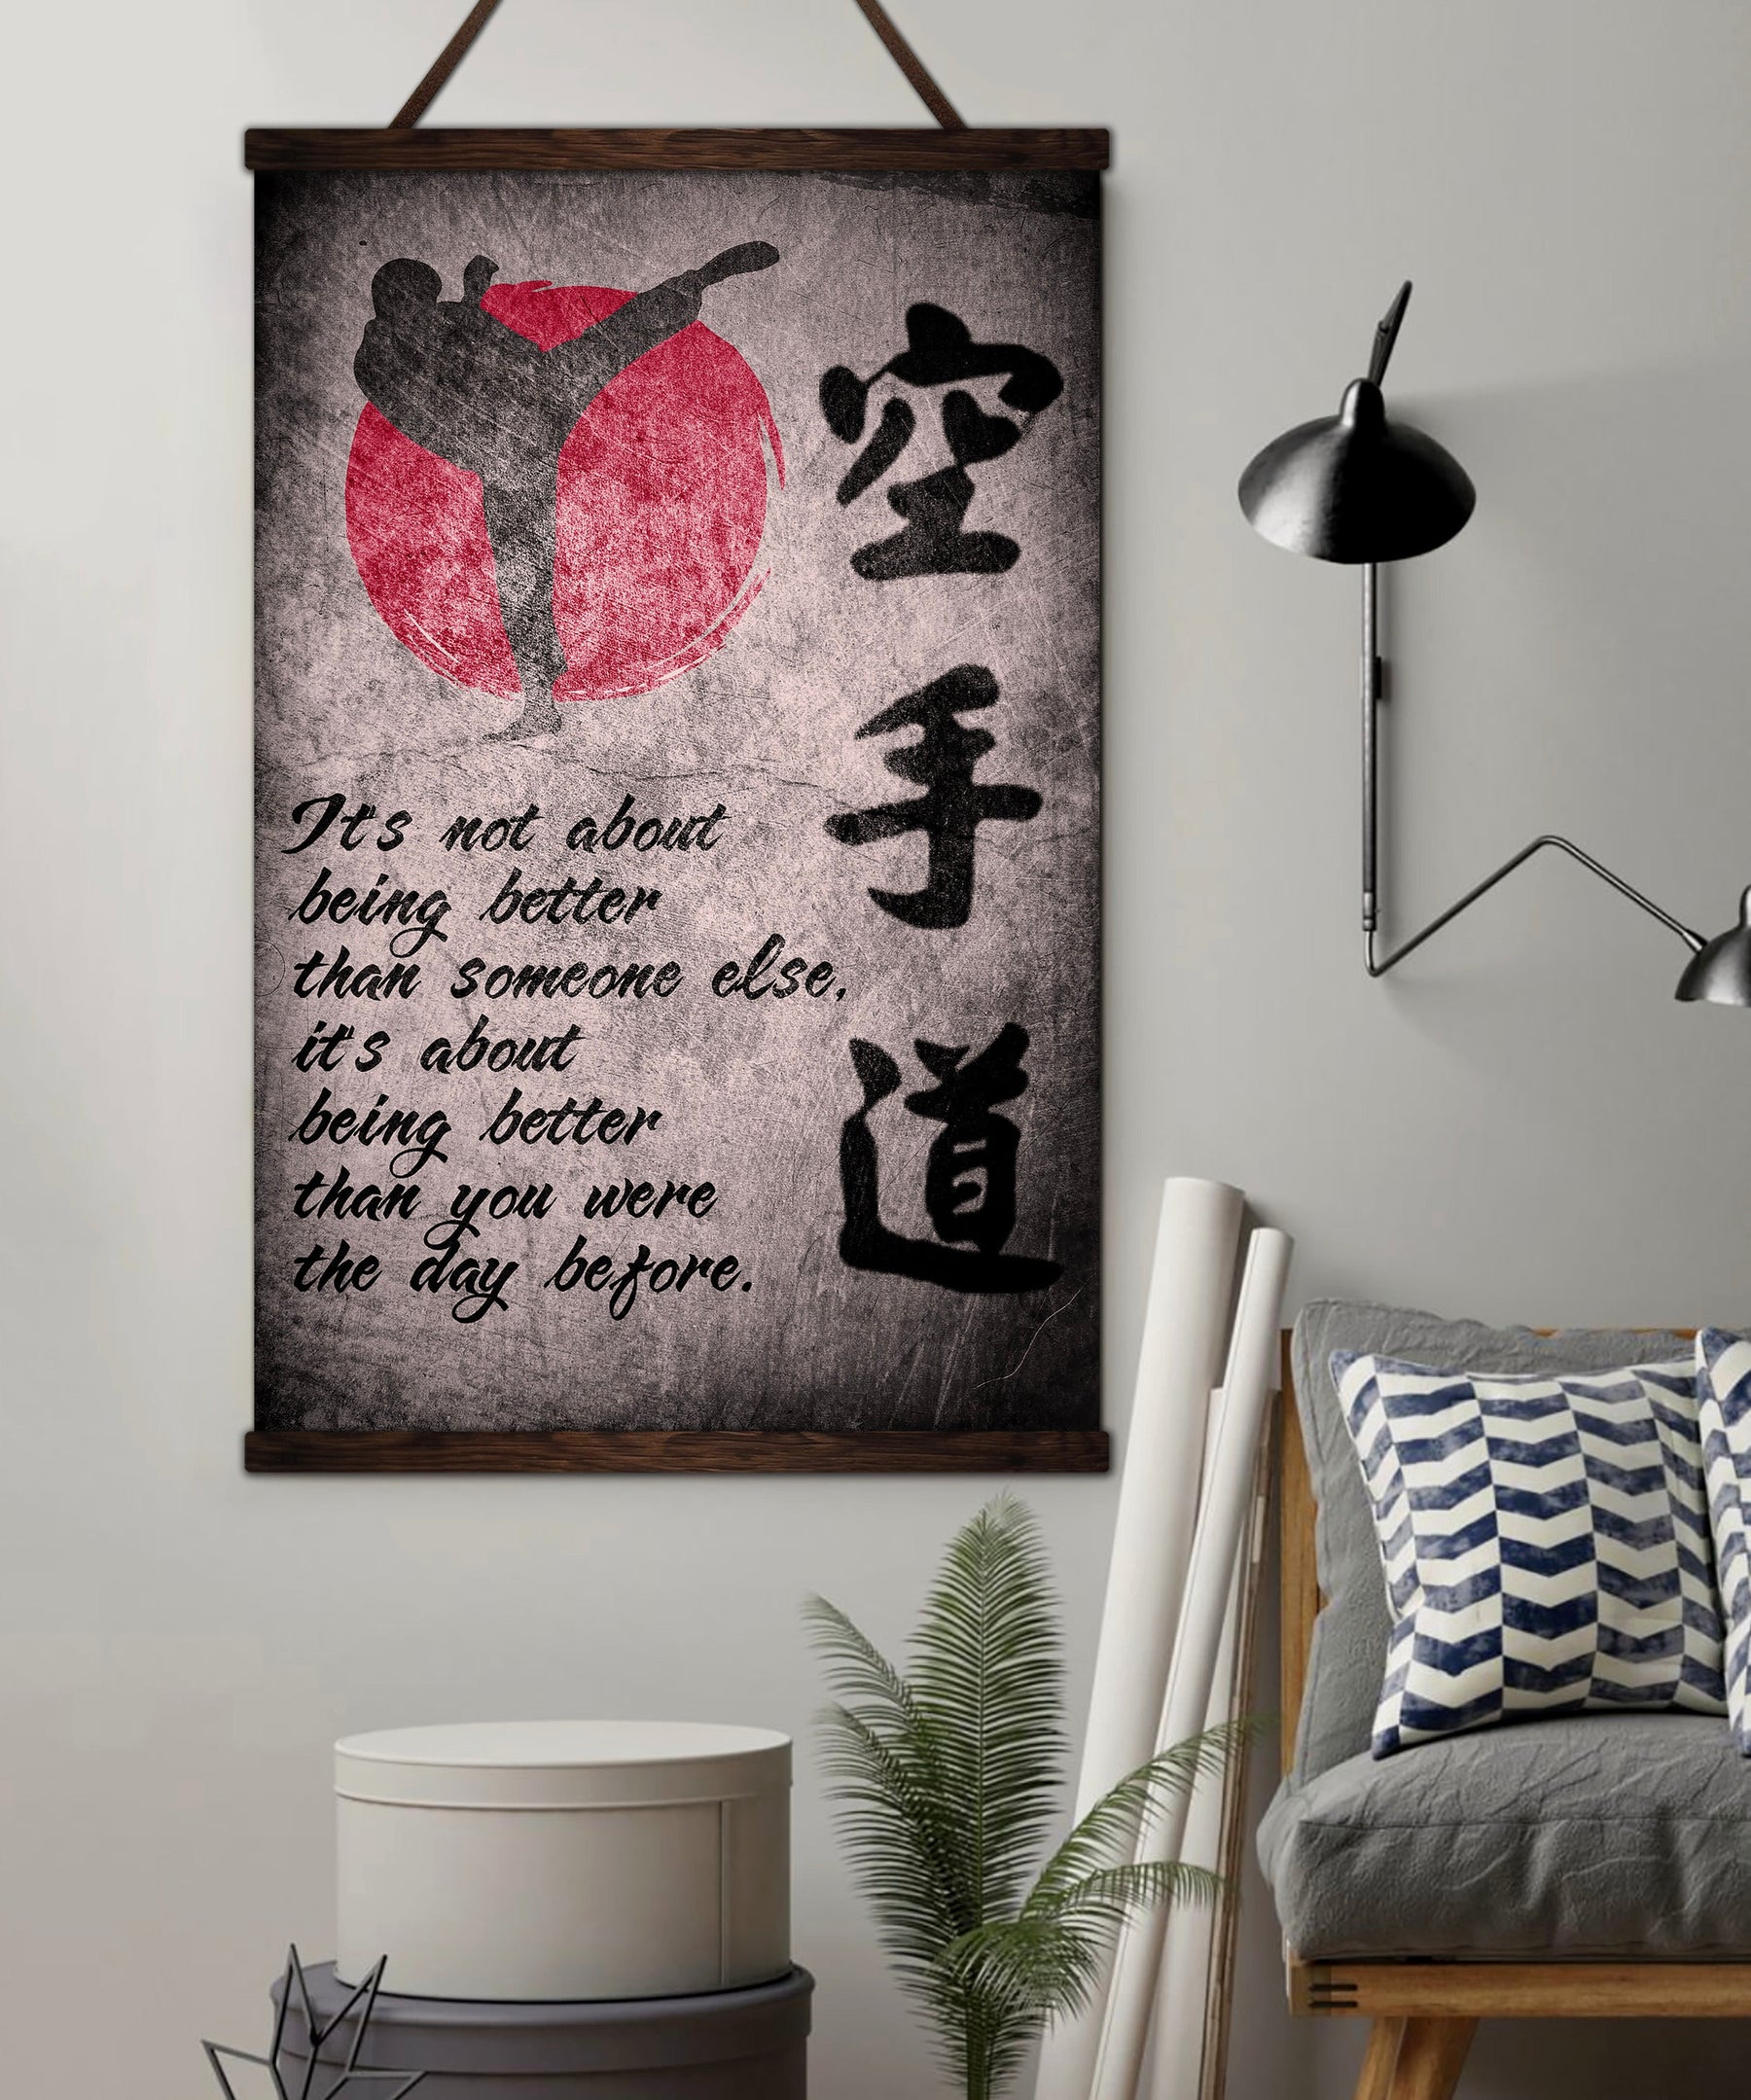 KA010 - It's Not About Being Better Than Someone Else - It's About Being Better Than You Were The Day Before - Karate Kanji - Vertical Poster - Vertical Canvas - Karate Poster - Karate Canvas